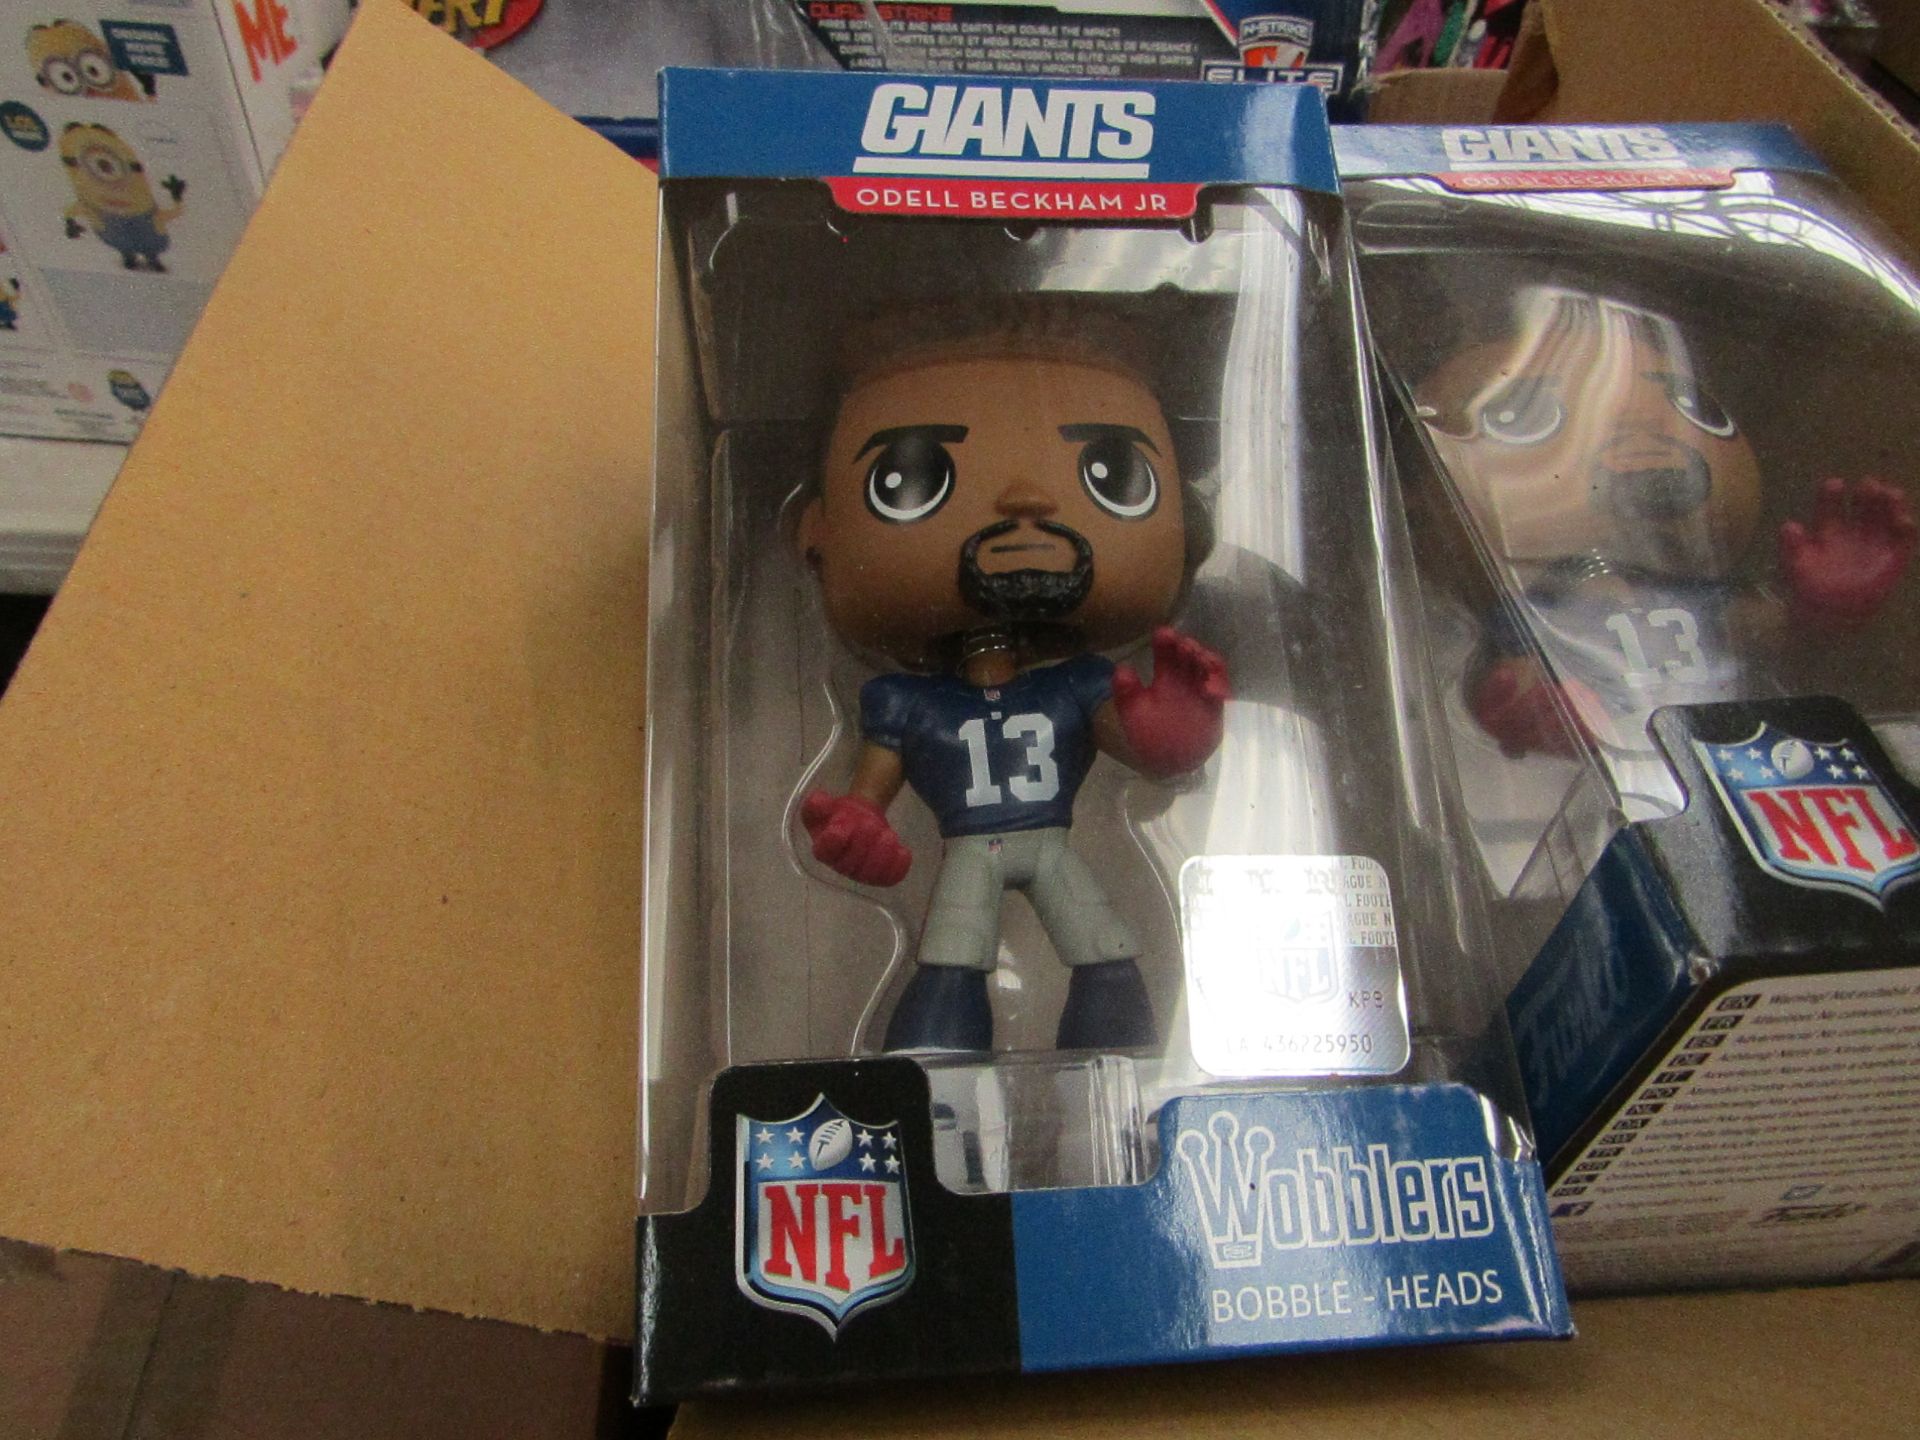 2 x Wobblers Giants Odell Beckham Figures. New & Boxed